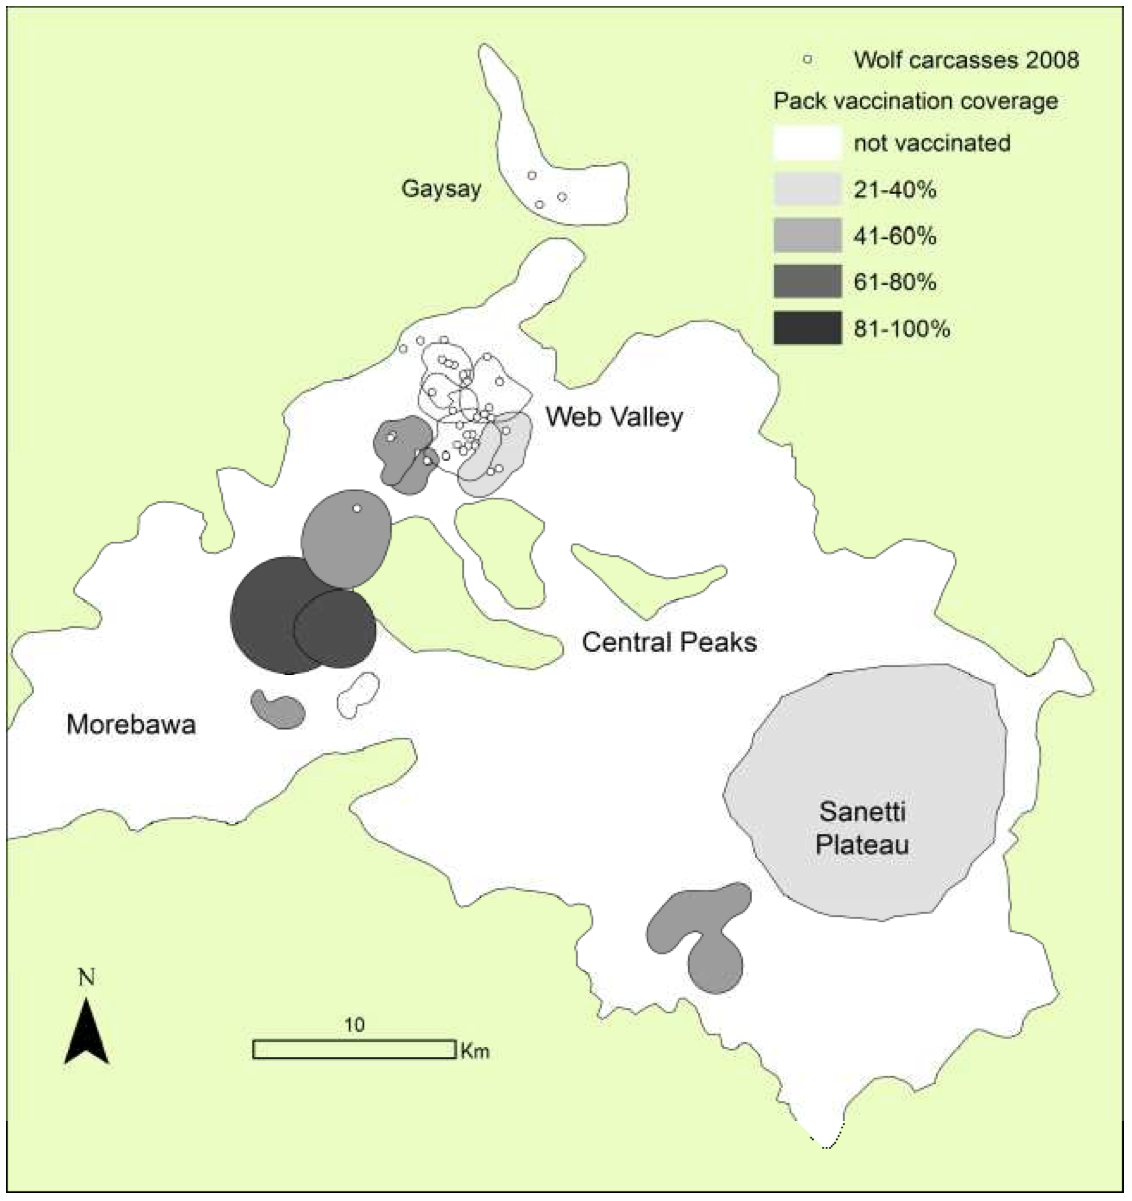 Figure 1: Distribution of wolf carcasses found in 2008 in relation to historical pack vaccination coverage. As predicted by modelling low
coverage vaccination in surrounding packs was effective in restricting the spread of rabies outside the initial
outbreak in Web Valley in 2008.